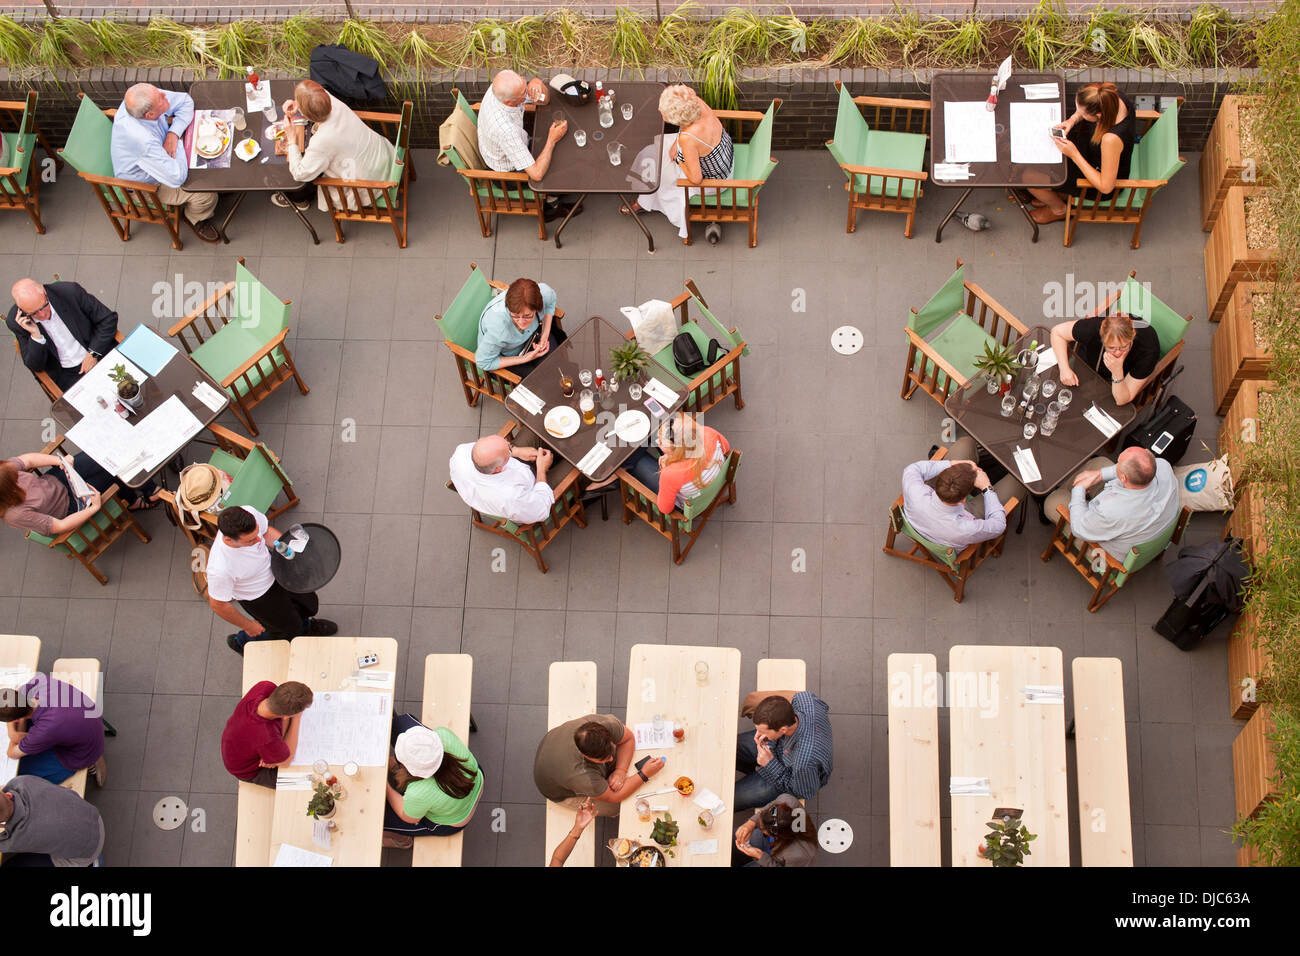 Overhead view of people at a restaurant on the south bank of the Thames in London, England. Stock Photo